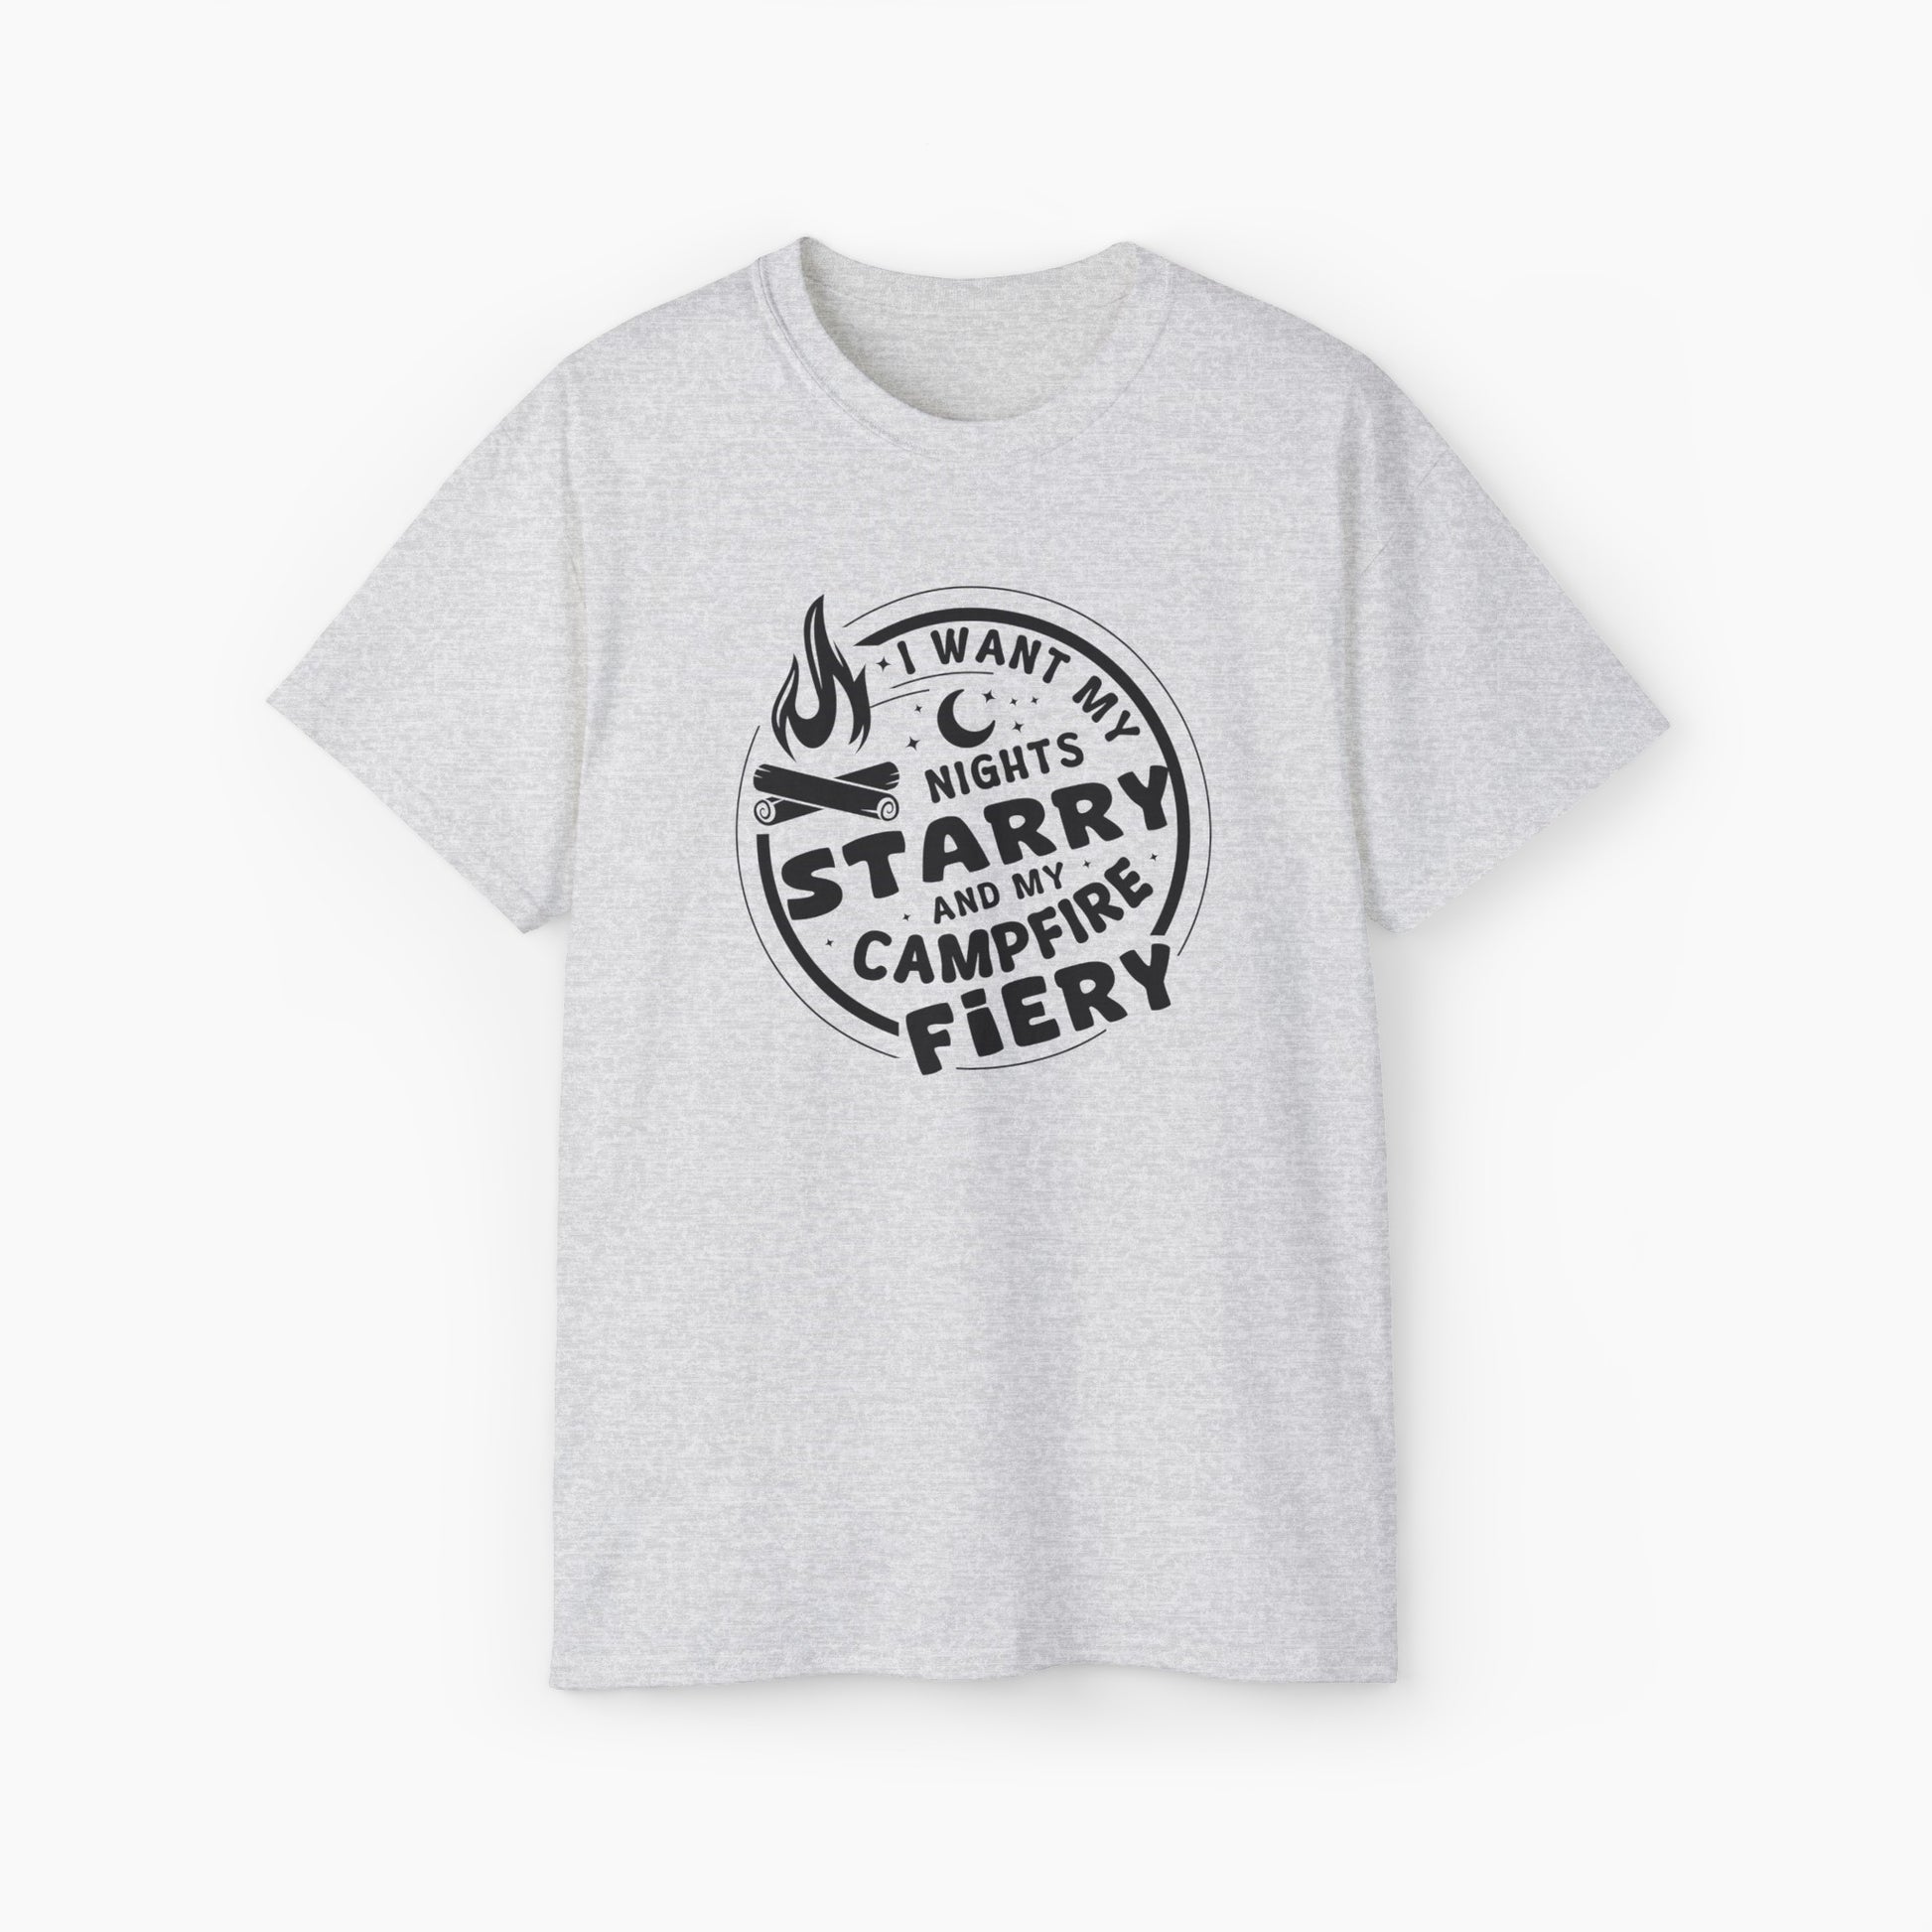 Light grey t-shirt with the text 'I want my nights starry and my campfire fiery' in a circular design, featuring a campfire, stars, and moon on a plain background.